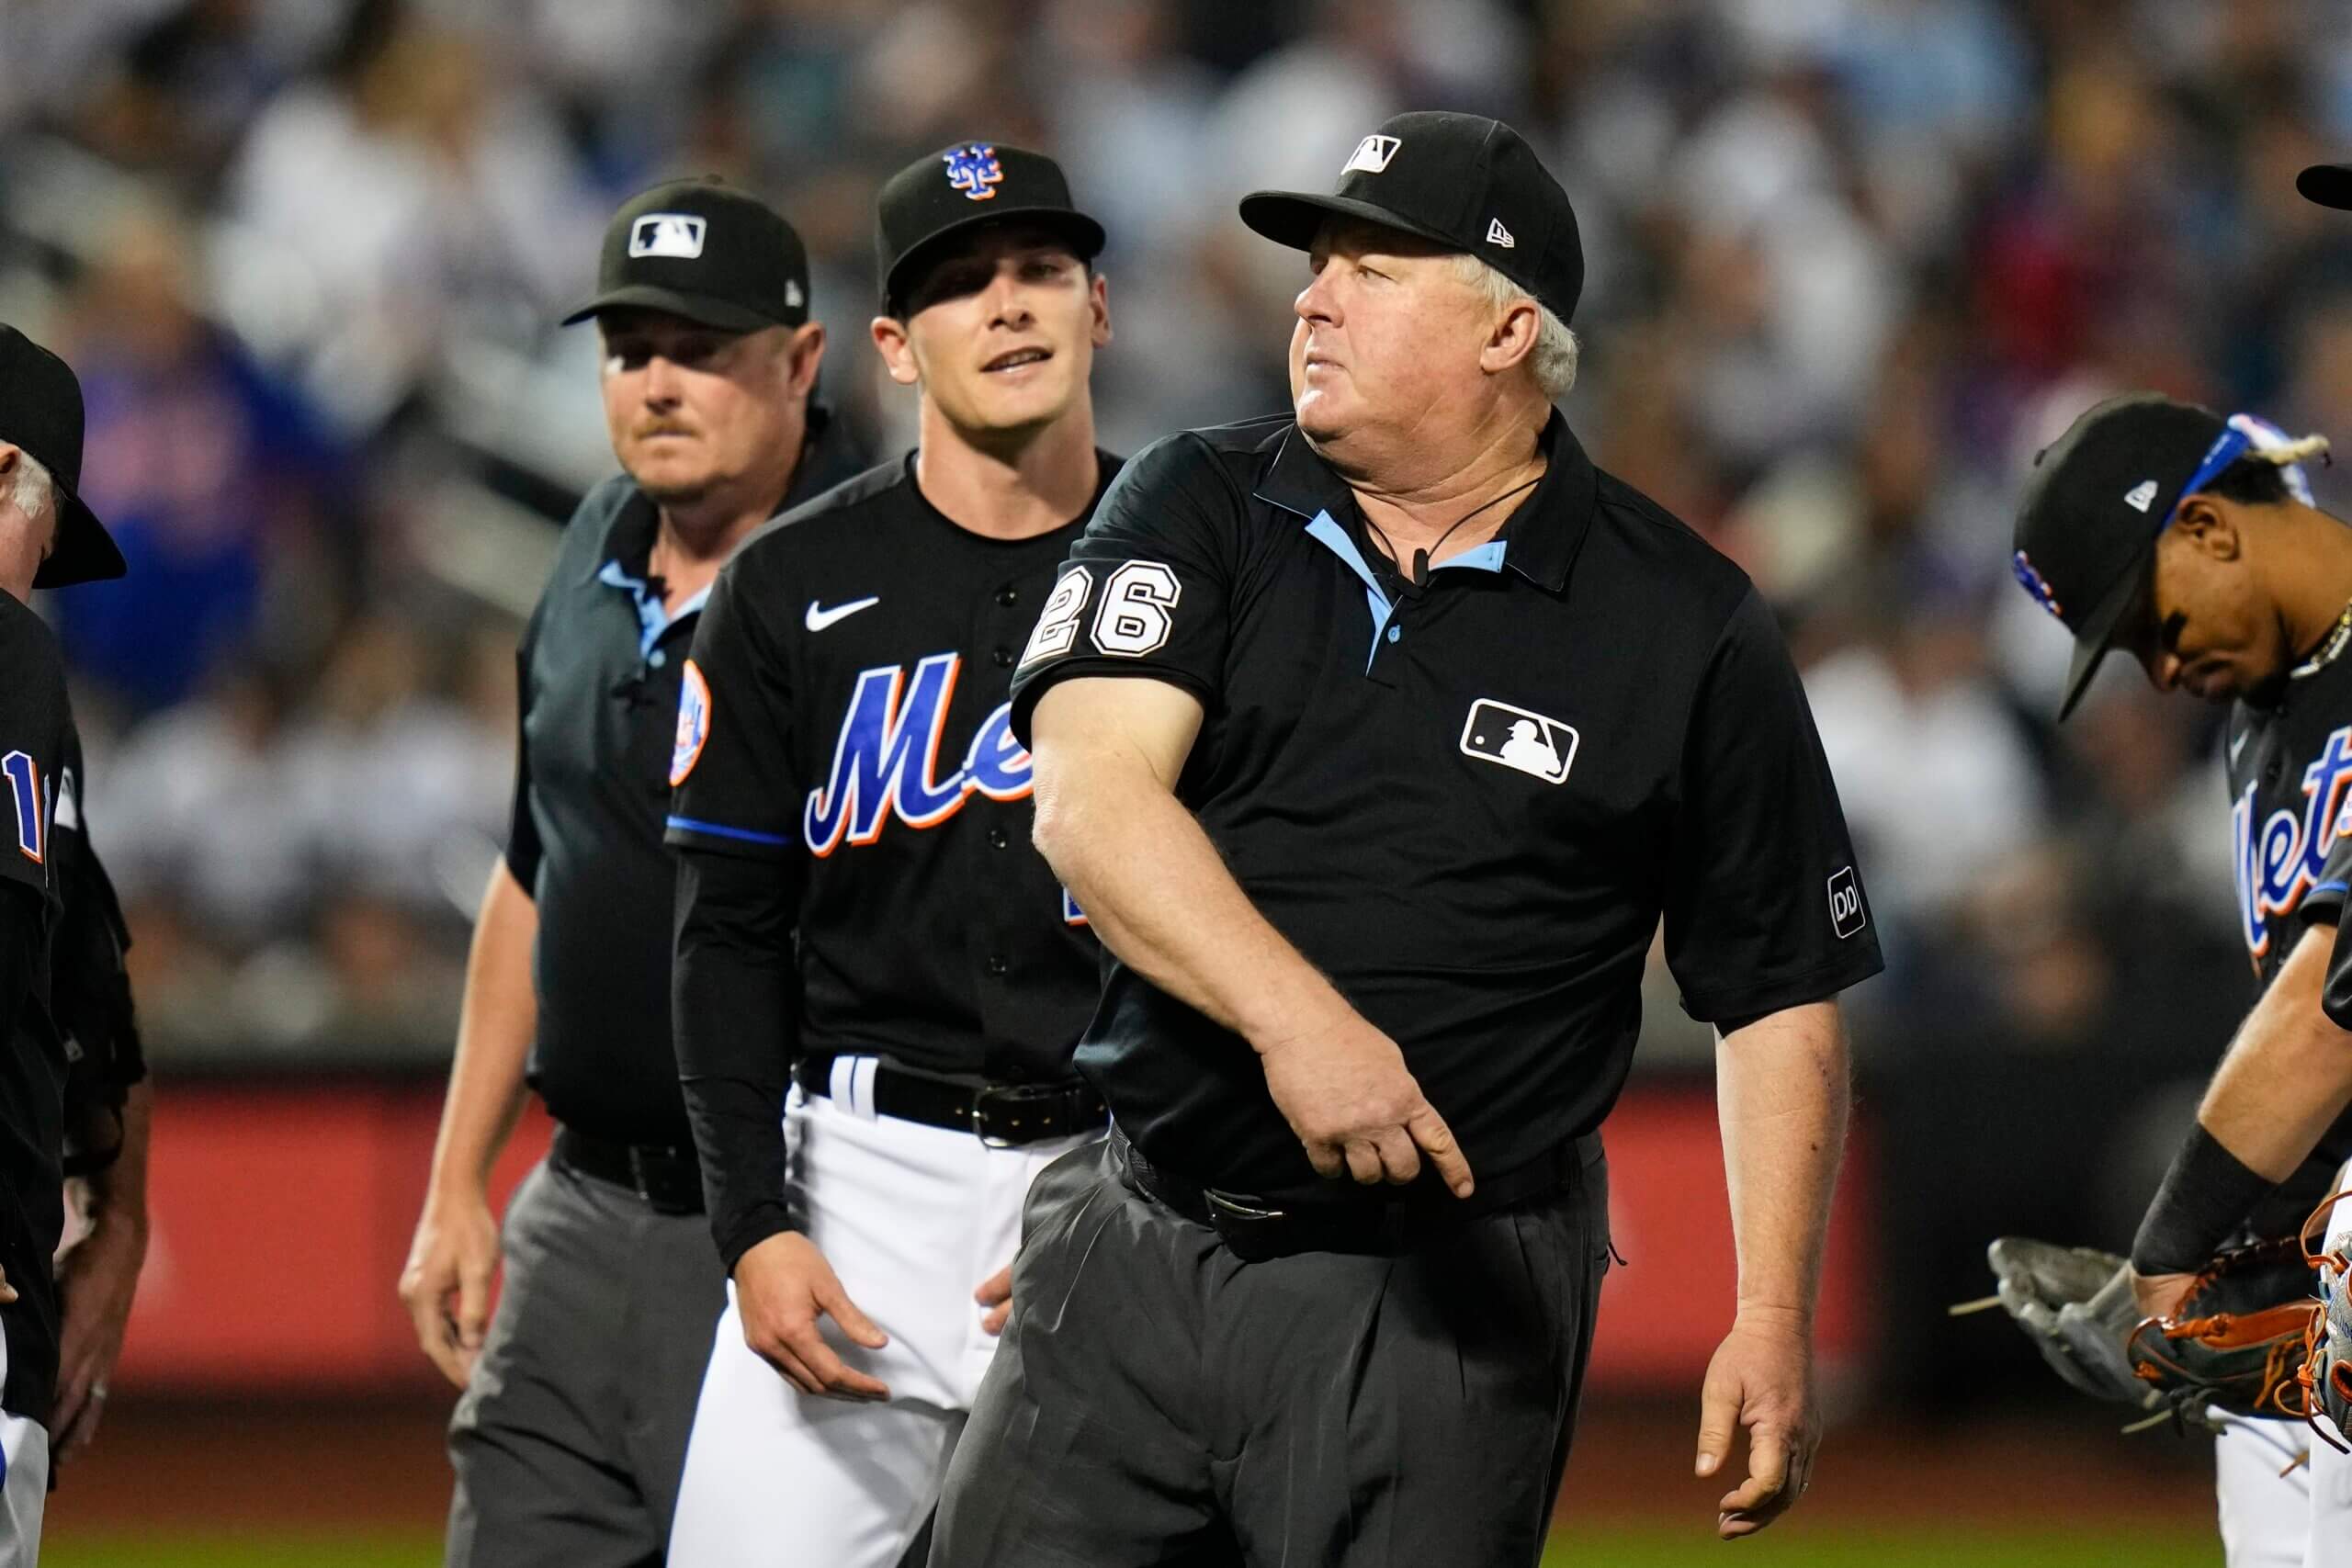 Mets reliever Drew Smith ejected after umpire hand check vs. Yankees